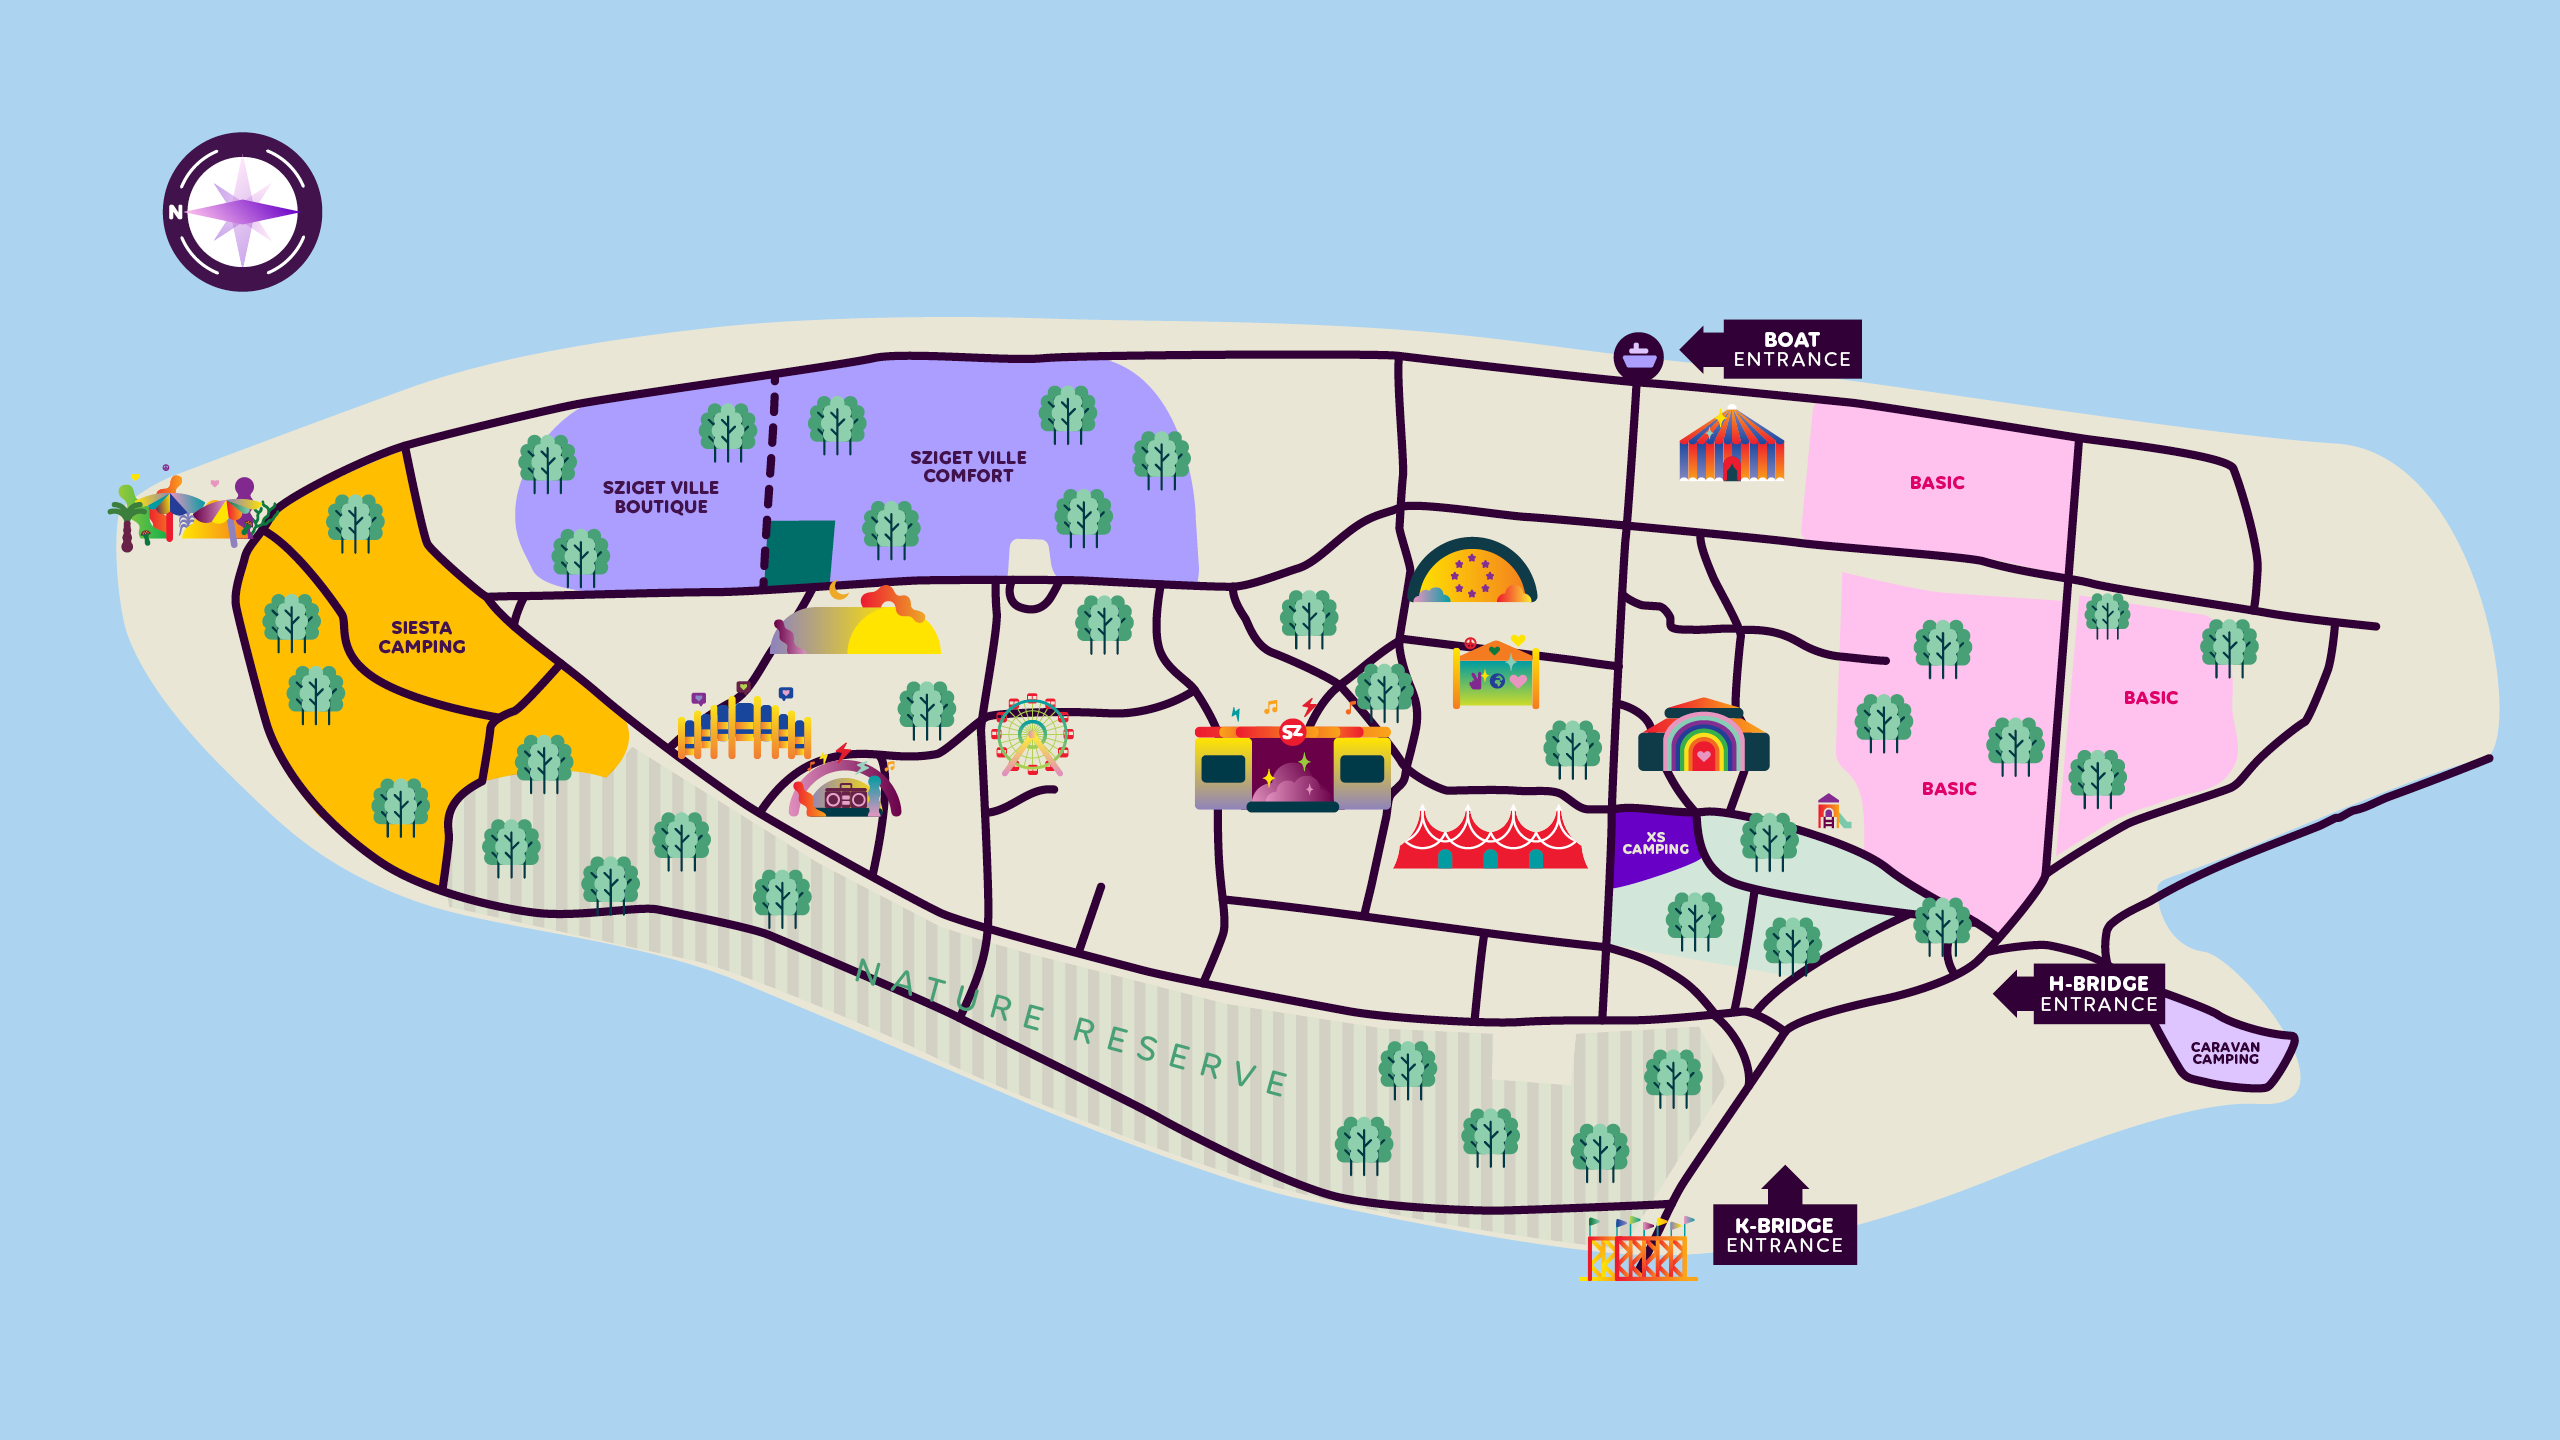 https://cdn2.szigetfestival.com/c21yue2/f851/nl/media/2022/11/2023map_camping_plus.png